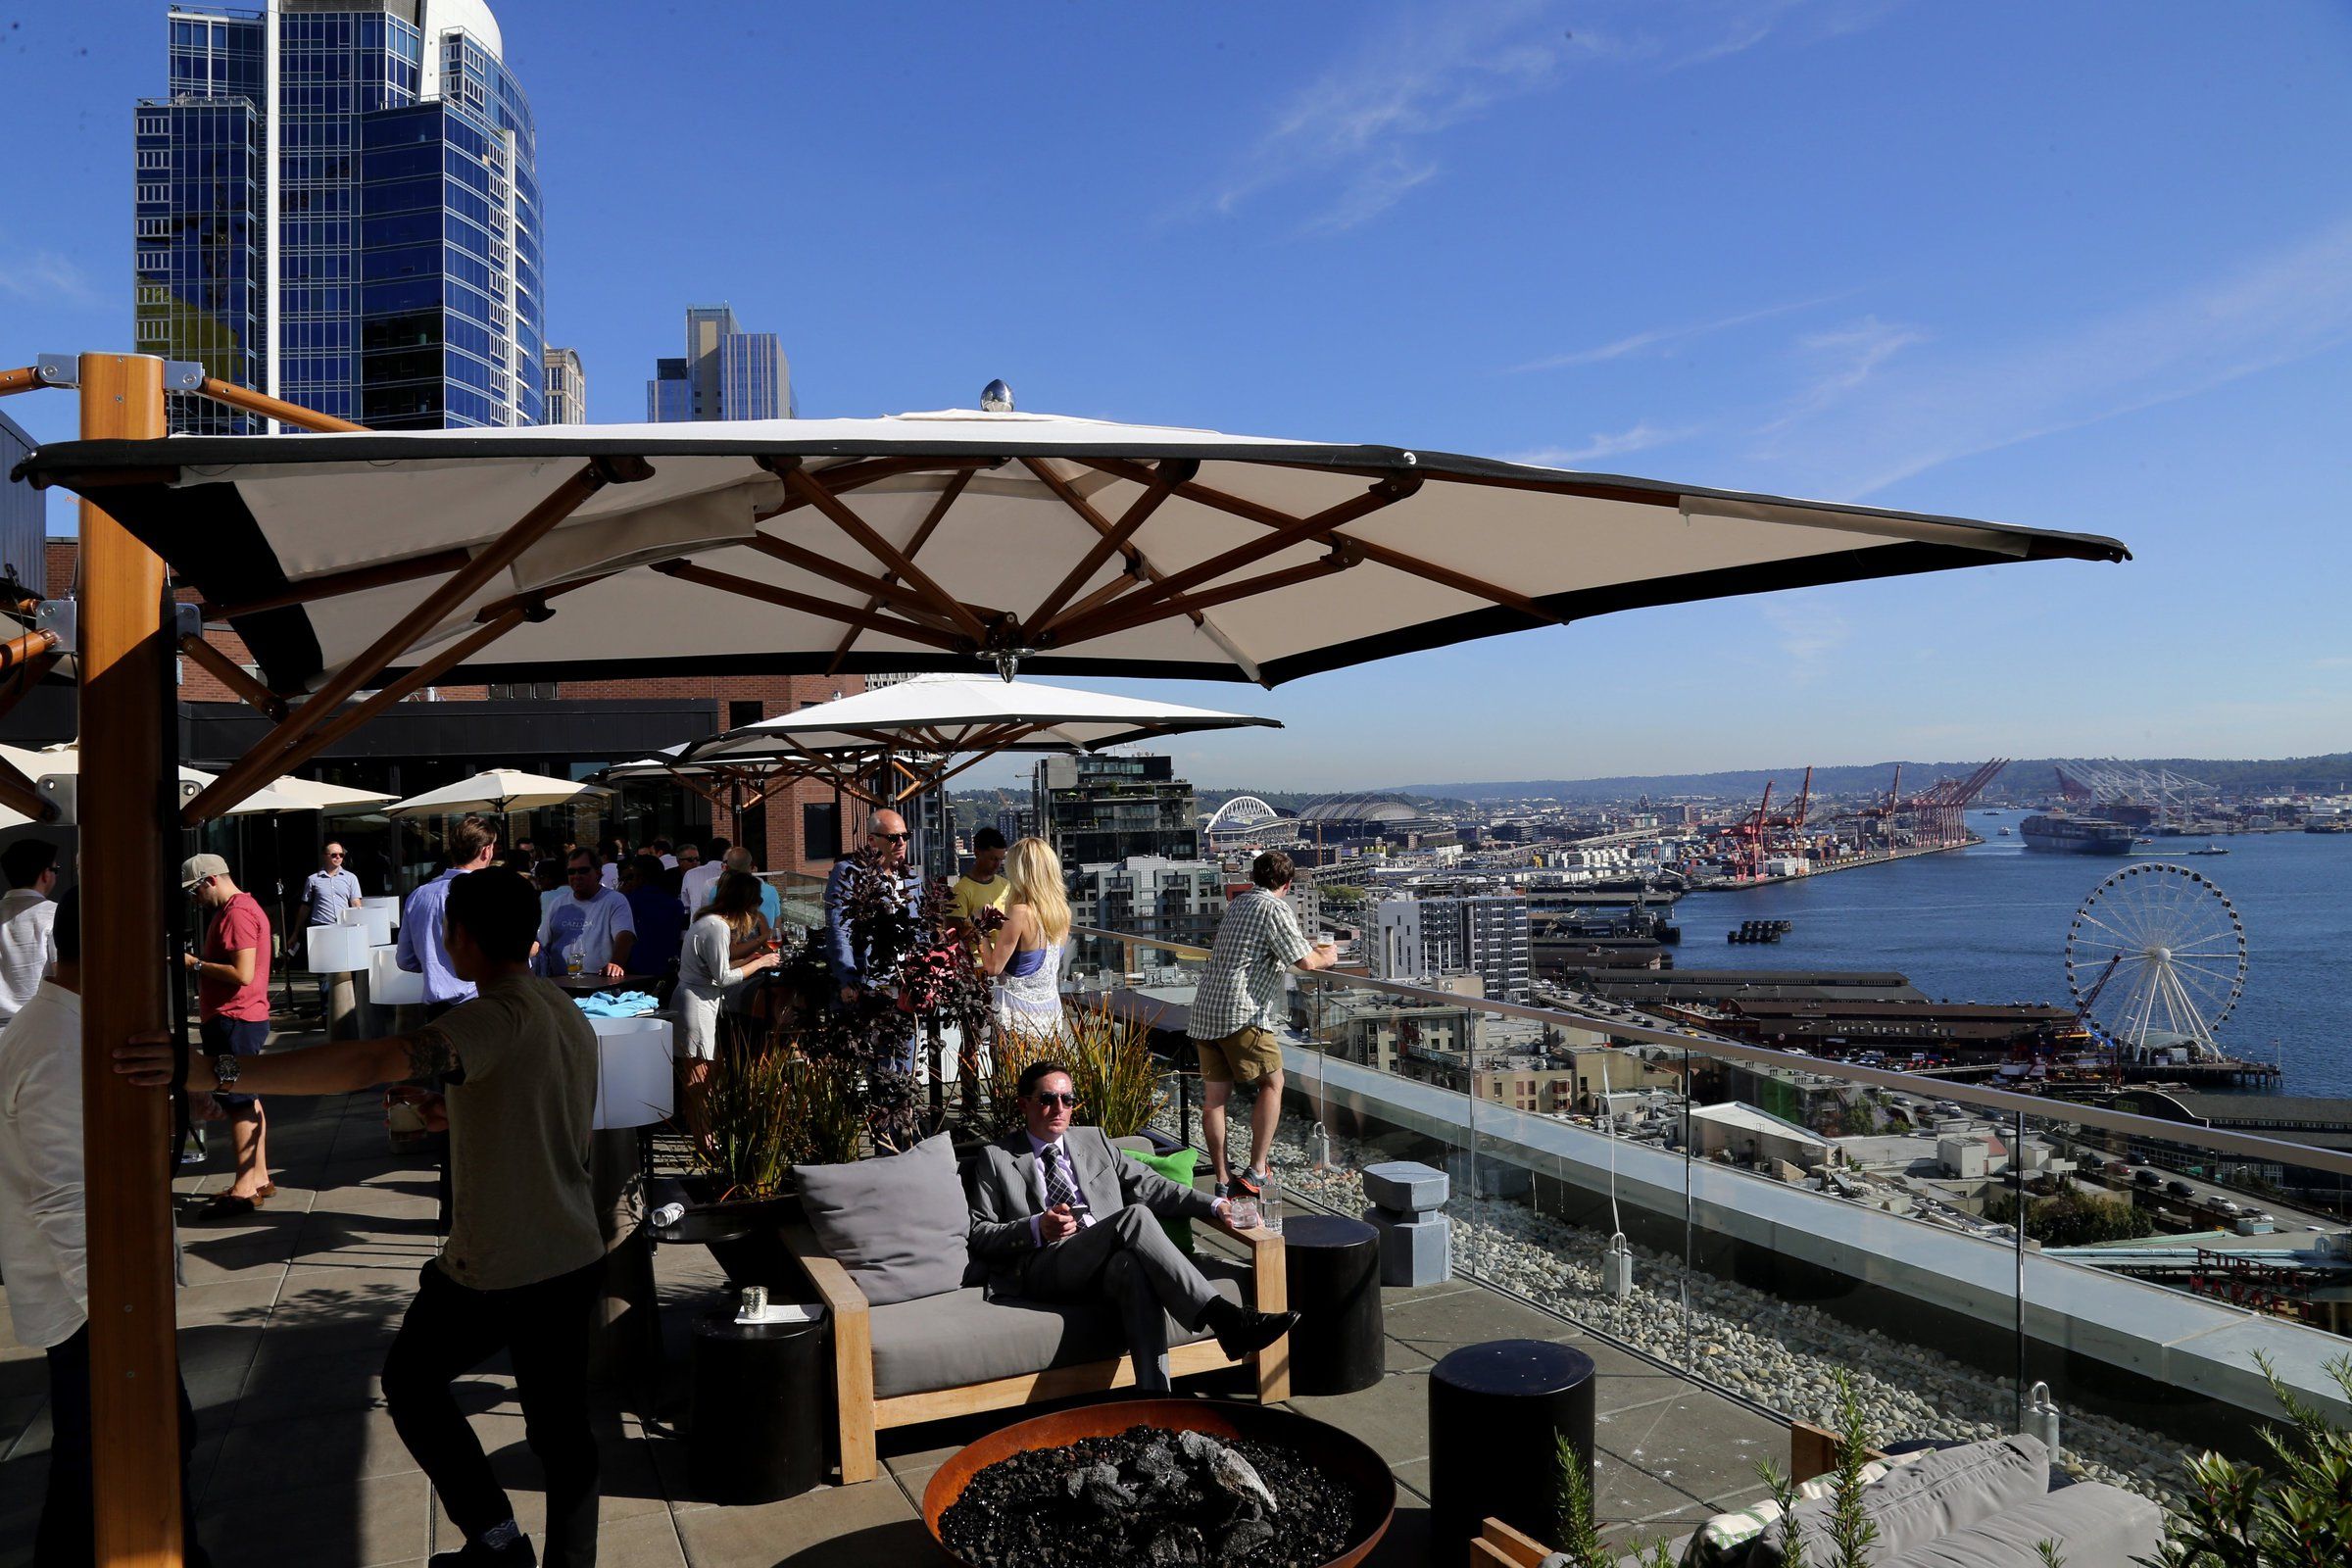 Rooftop bars are all the rage in Seattle — we rated the 4 hottest